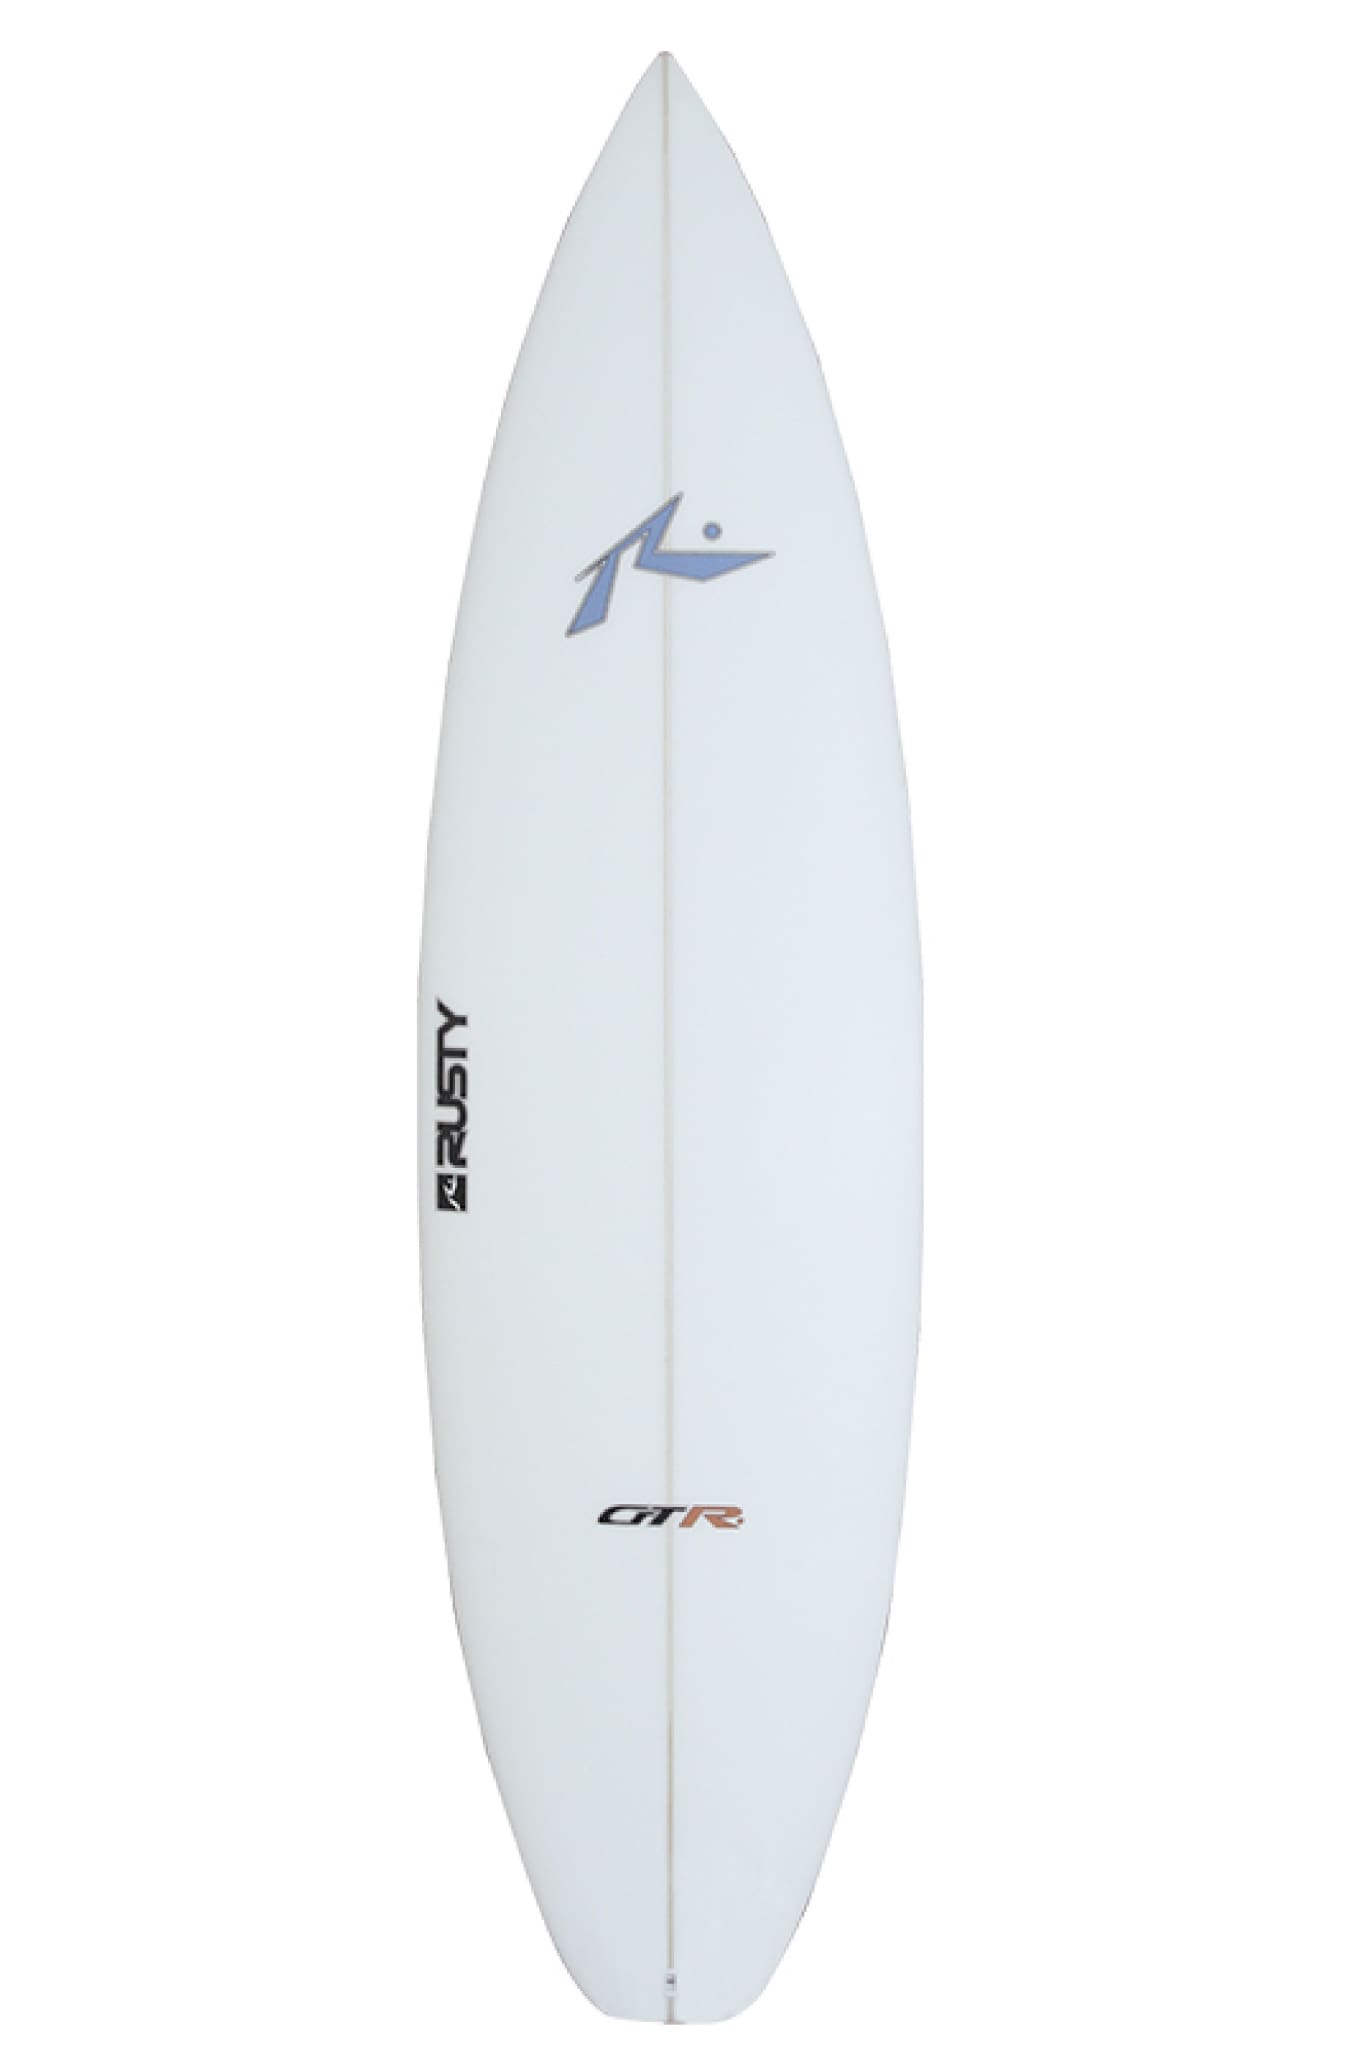 GTR | Surfboards-Rusty Surfboards South Africa